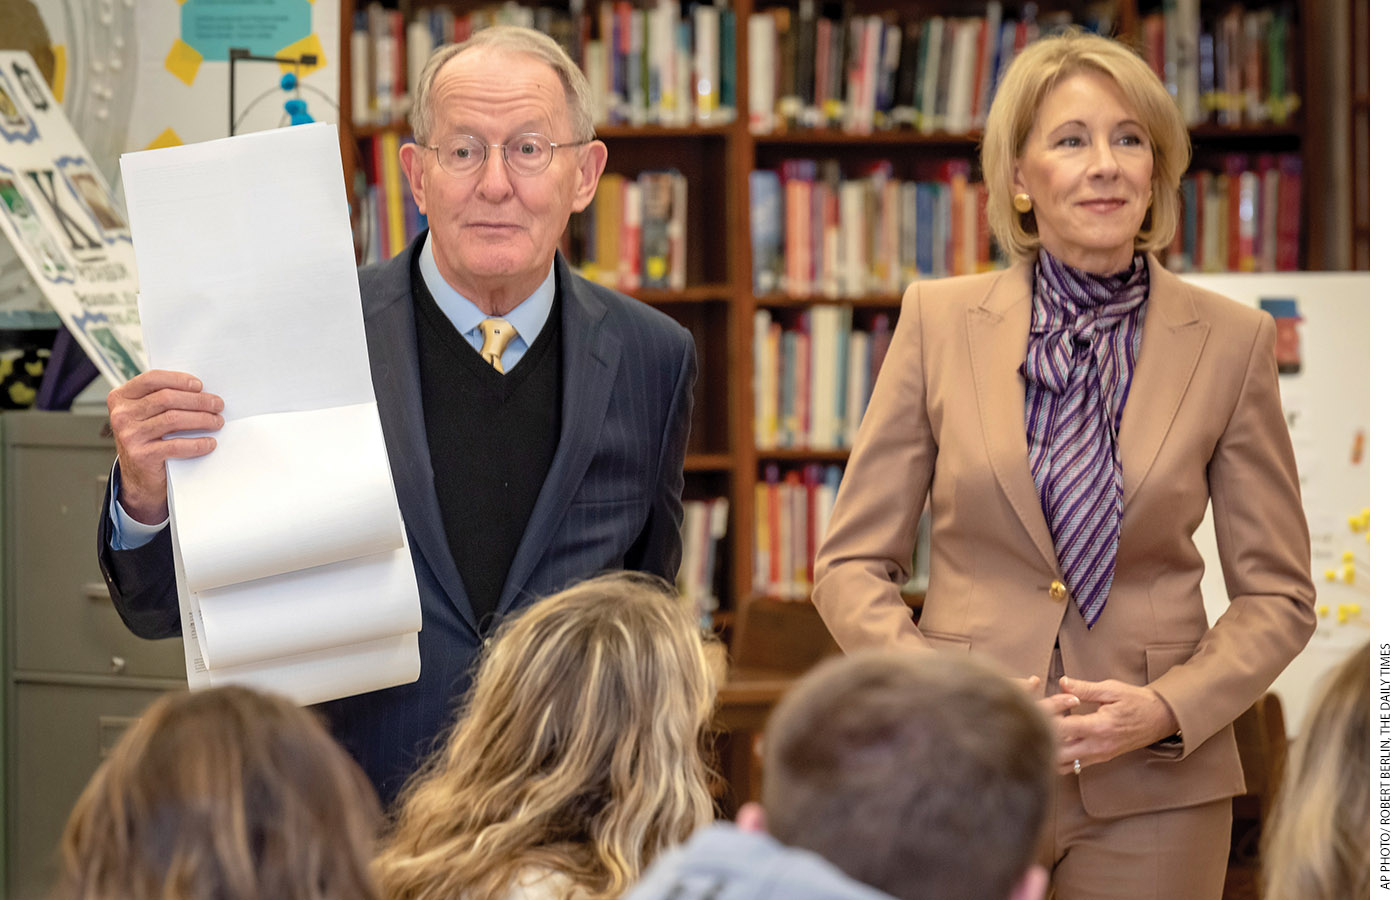 Alexander, next to Secretary DeVos, holds up the Free Application for Federal Student Aid as students at the Sevier County High School in Tennessee watch. “There are still too many questions on this form,” Alexander says.